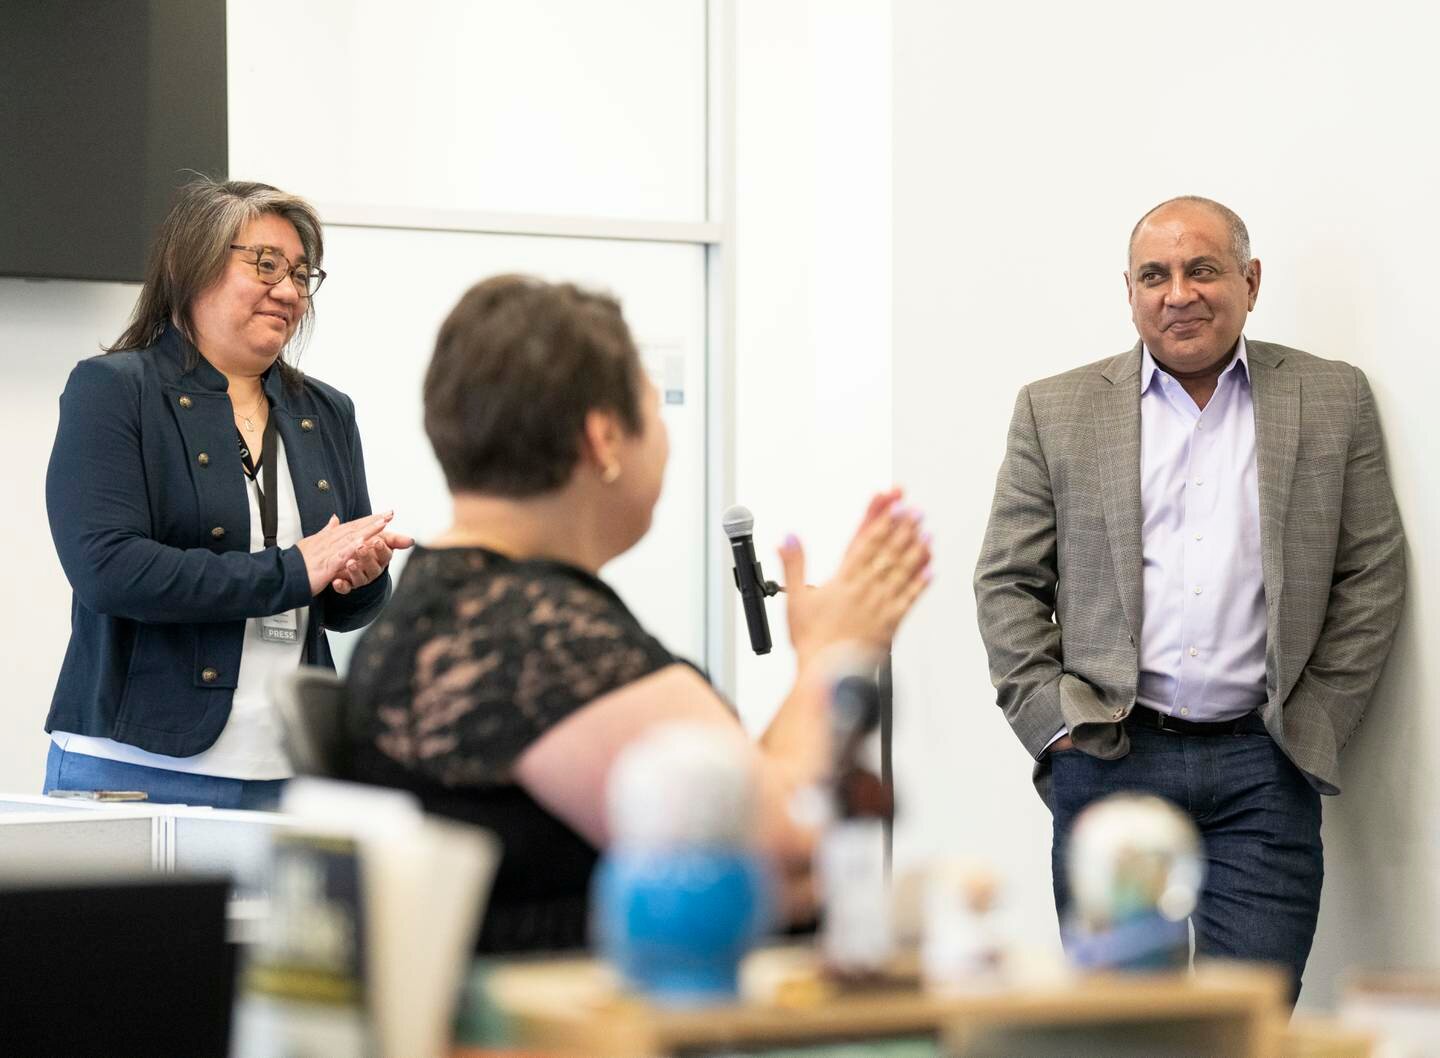 The Baltimore Banner CEO, Imtiaz Patel, announces his departure on Wednesday, May 31. (Jessica Gallagher/The Baltimore Banner)